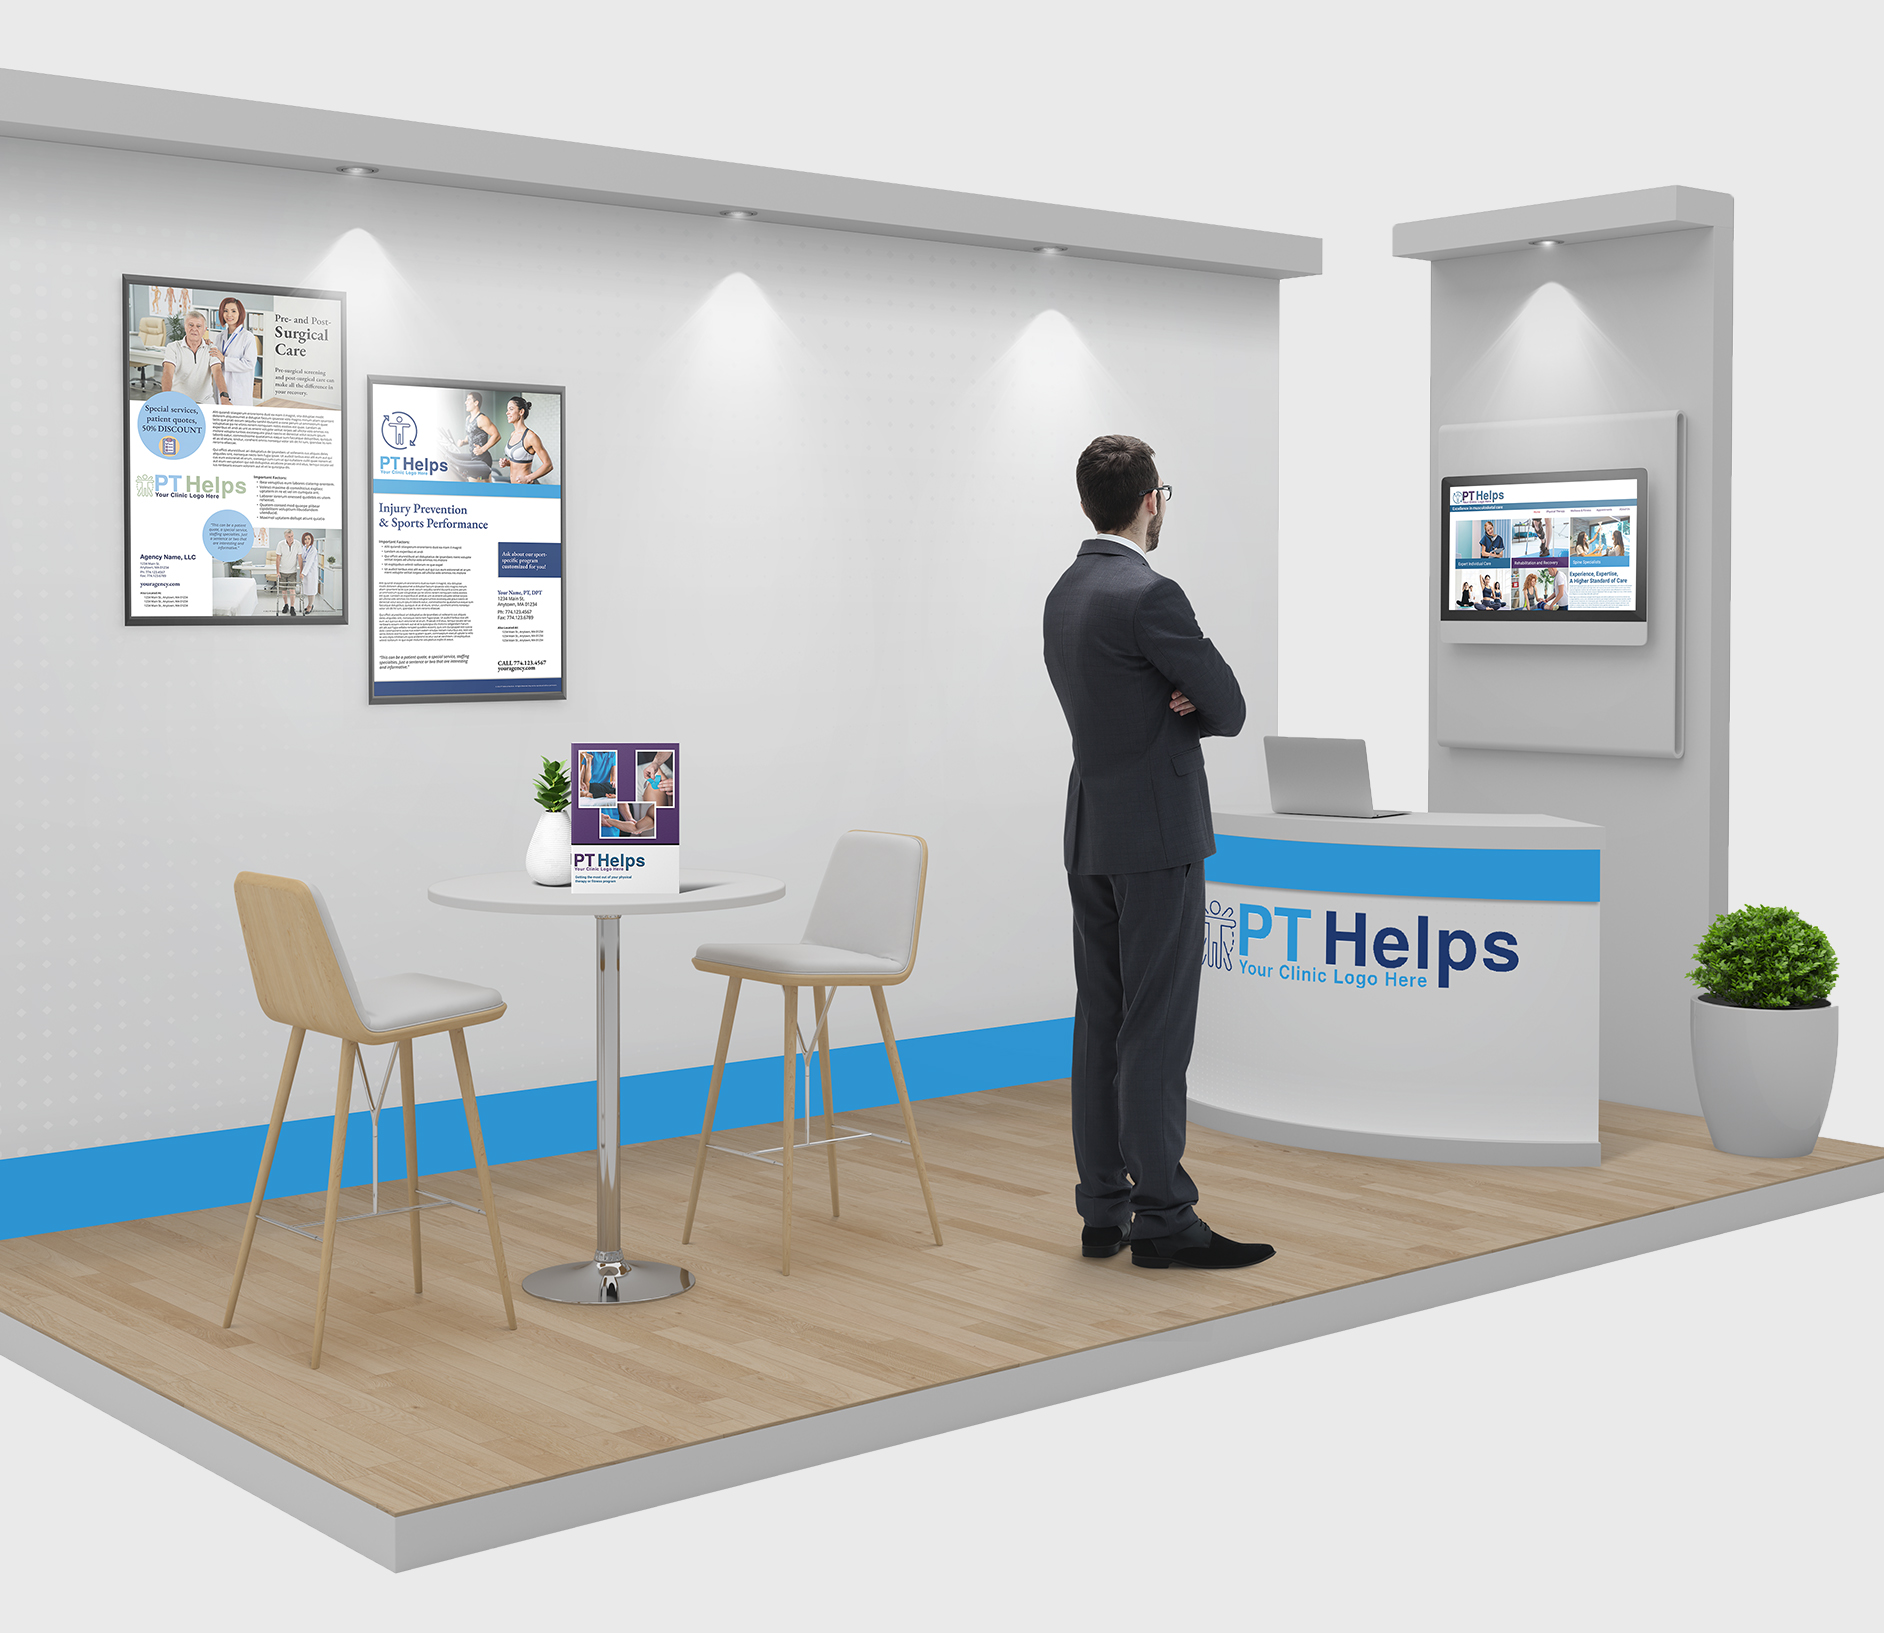 Branded display example of a physical therapy reception area